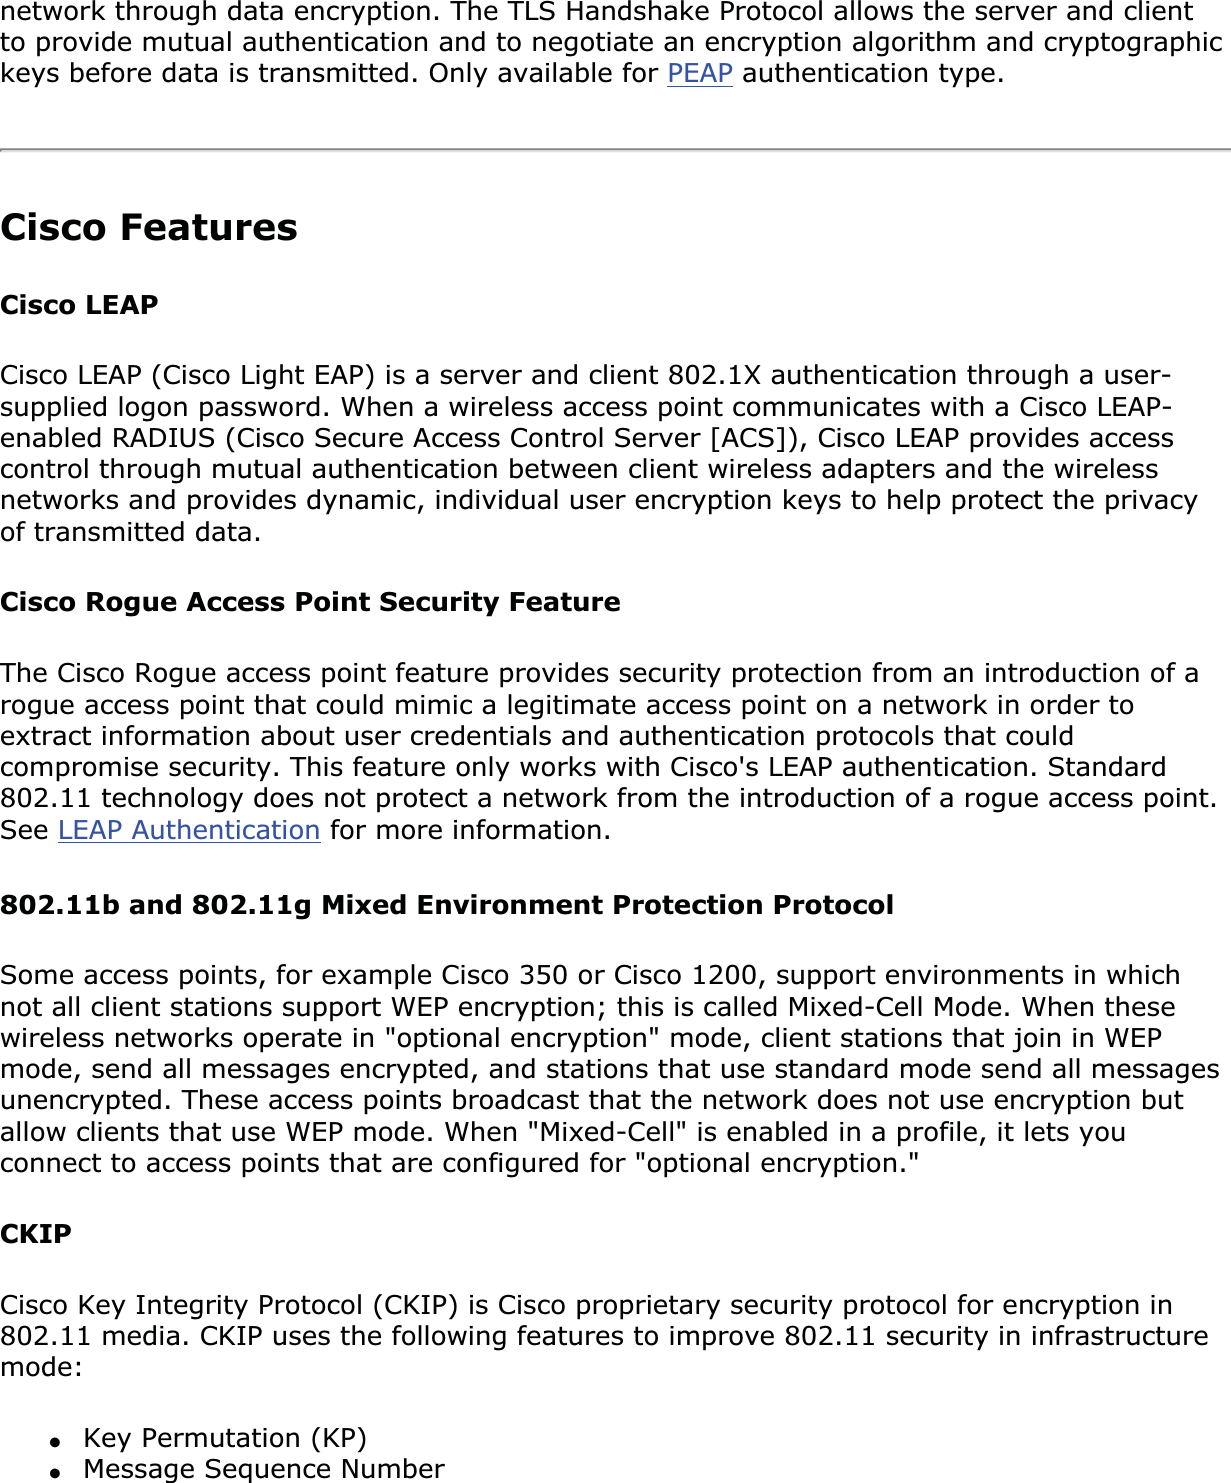 network through data encryption. The TLS Handshake Protocol allows the server and client to provide mutual authentication and to negotiate an encryption algorithm and cryptographic keys before data is transmitted. Only available for PEAP authentication type.Cisco FeaturesCisco LEAP Cisco LEAP (Cisco Light EAP) is a server and client 802.1X authentication through a user-supplied logon password. When a wireless access point communicates with a Cisco LEAP-enabled RADIUS (Cisco Secure Access Control Server [ACS]), Cisco LEAP provides access control through mutual authentication between client wireless adapters and the wireless networks and provides dynamic, individual user encryption keys to help protect the privacy of transmitted data.Cisco Rogue Access Point Security FeatureThe Cisco Rogue access point feature provides security protection from an introduction of a rogue access point that could mimic a legitimate access point on a network in order to extract information about user credentials and authentication protocols that could compromise security. This feature only works with Cisco&apos;s LEAP authentication. Standard 802.11 technology does not protect a network from the introduction of a rogue access point. See LEAP Authentication for more information.802.11b and 802.11g Mixed Environment Protection ProtocolSome access points, for example Cisco 350 or Cisco 1200, support environments in which not all client stations support WEP encryption; this is called Mixed-Cell Mode. When these wireless networks operate in &quot;optional encryption&quot; mode, client stations that join in WEP mode, send all messages encrypted, and stations that use standard mode send all messages unencrypted. These access points broadcast that the network does not use encryption but allow clients that use WEP mode. When &quot;Mixed-Cell&quot; is enabled in a profile, it lets you connect to access points that are configured for &quot;optional encryption.&quot;CKIPCisco Key Integrity Protocol (CKIP) is Cisco proprietary security protocol for encryption in 802.11 media. CKIP uses the following features to improve 802.11 security in infrastructure mode:●Key Permutation (KP)●Message Sequence Number